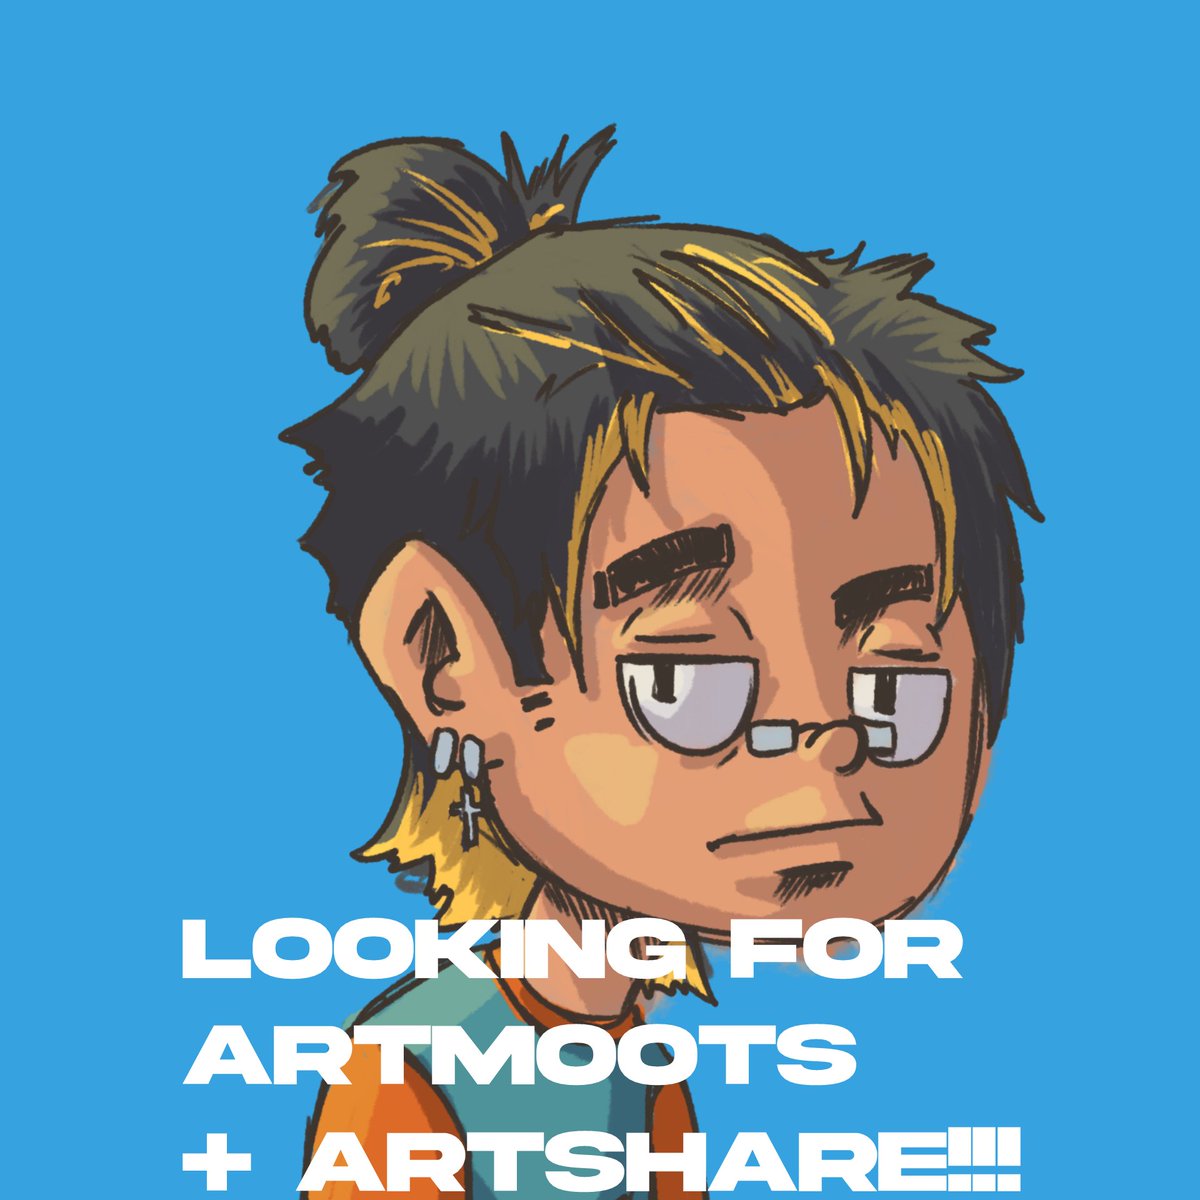 Looking for #artmoots and hosting an #artshare !!!

RT this post and the original post I'll be commenting below, then comment your recent art! Will try to RT each and everyone! You can follow me too if you want.

OPEN FOR EVERYONE!!